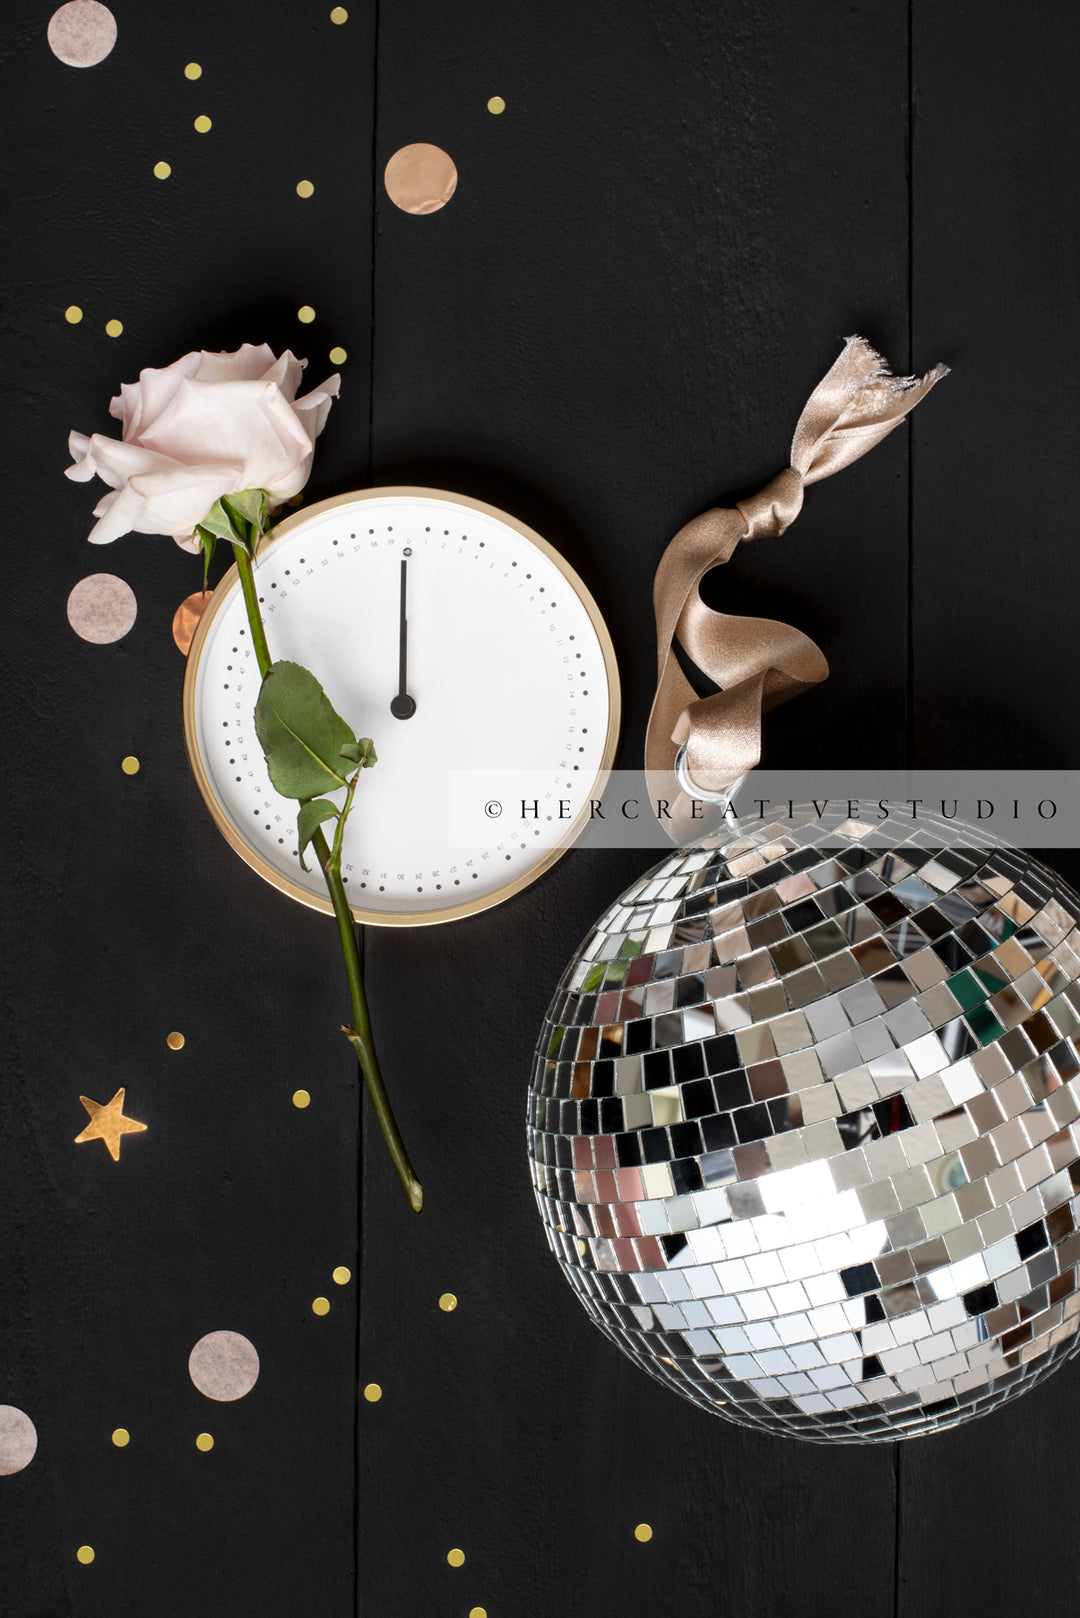 Disco Ball, Rose & Tablet, New Year's Eve Stock Image